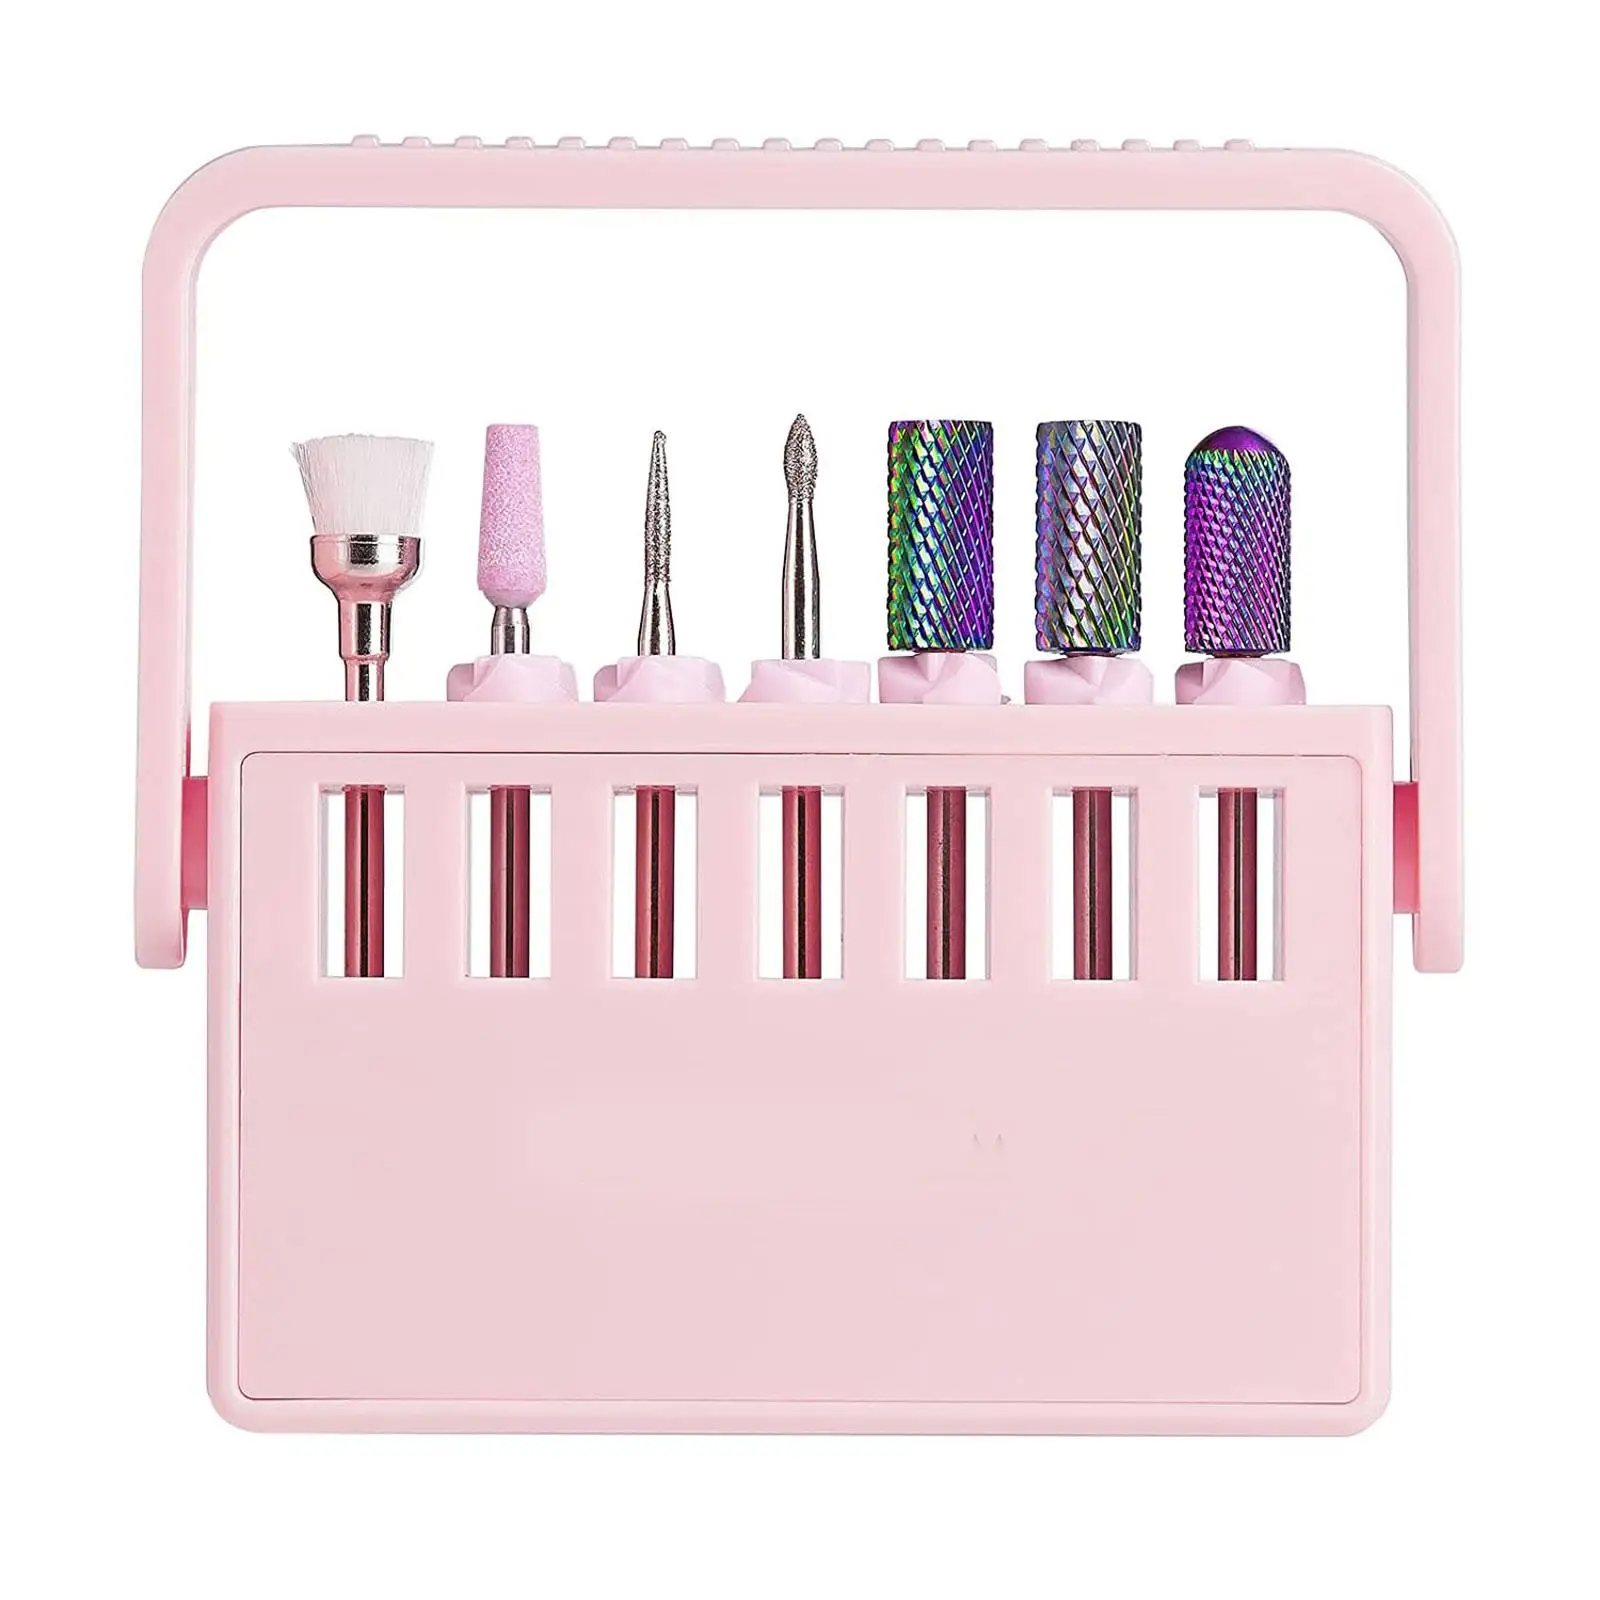 Nail Drill Bits Holder Small Acrylic Nails Manicure Tool Adjustable Stand 7 Holes Portable Drill Bits Stand Container for Salon